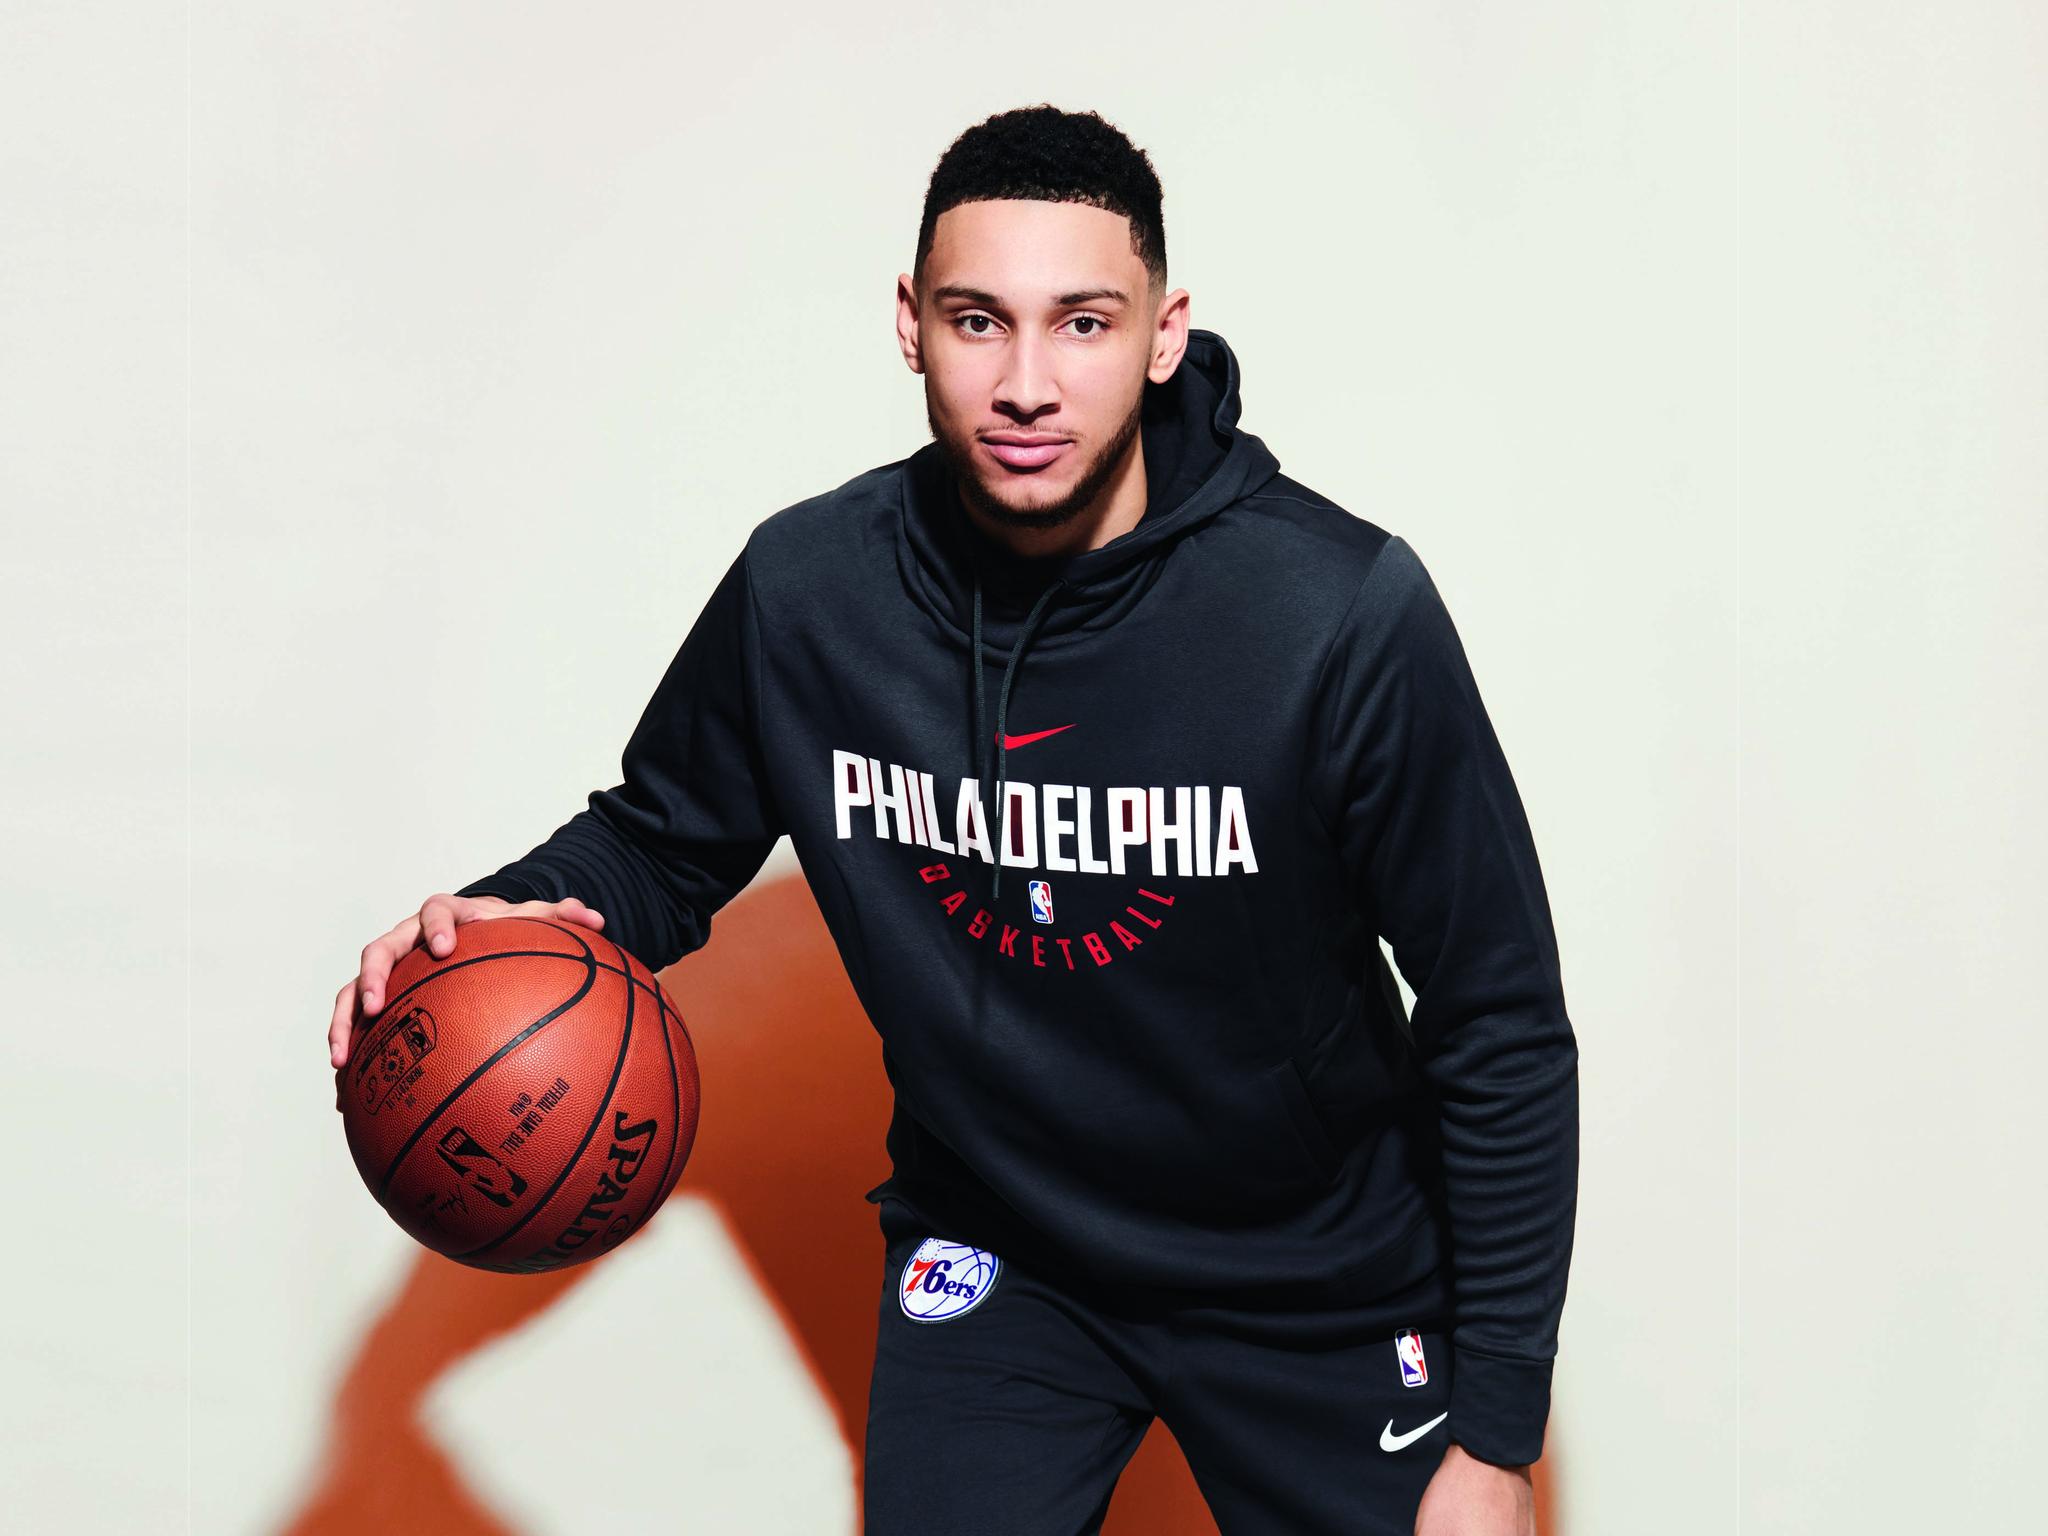 Sweatshirts from recent Sixers IG post went live today but almost